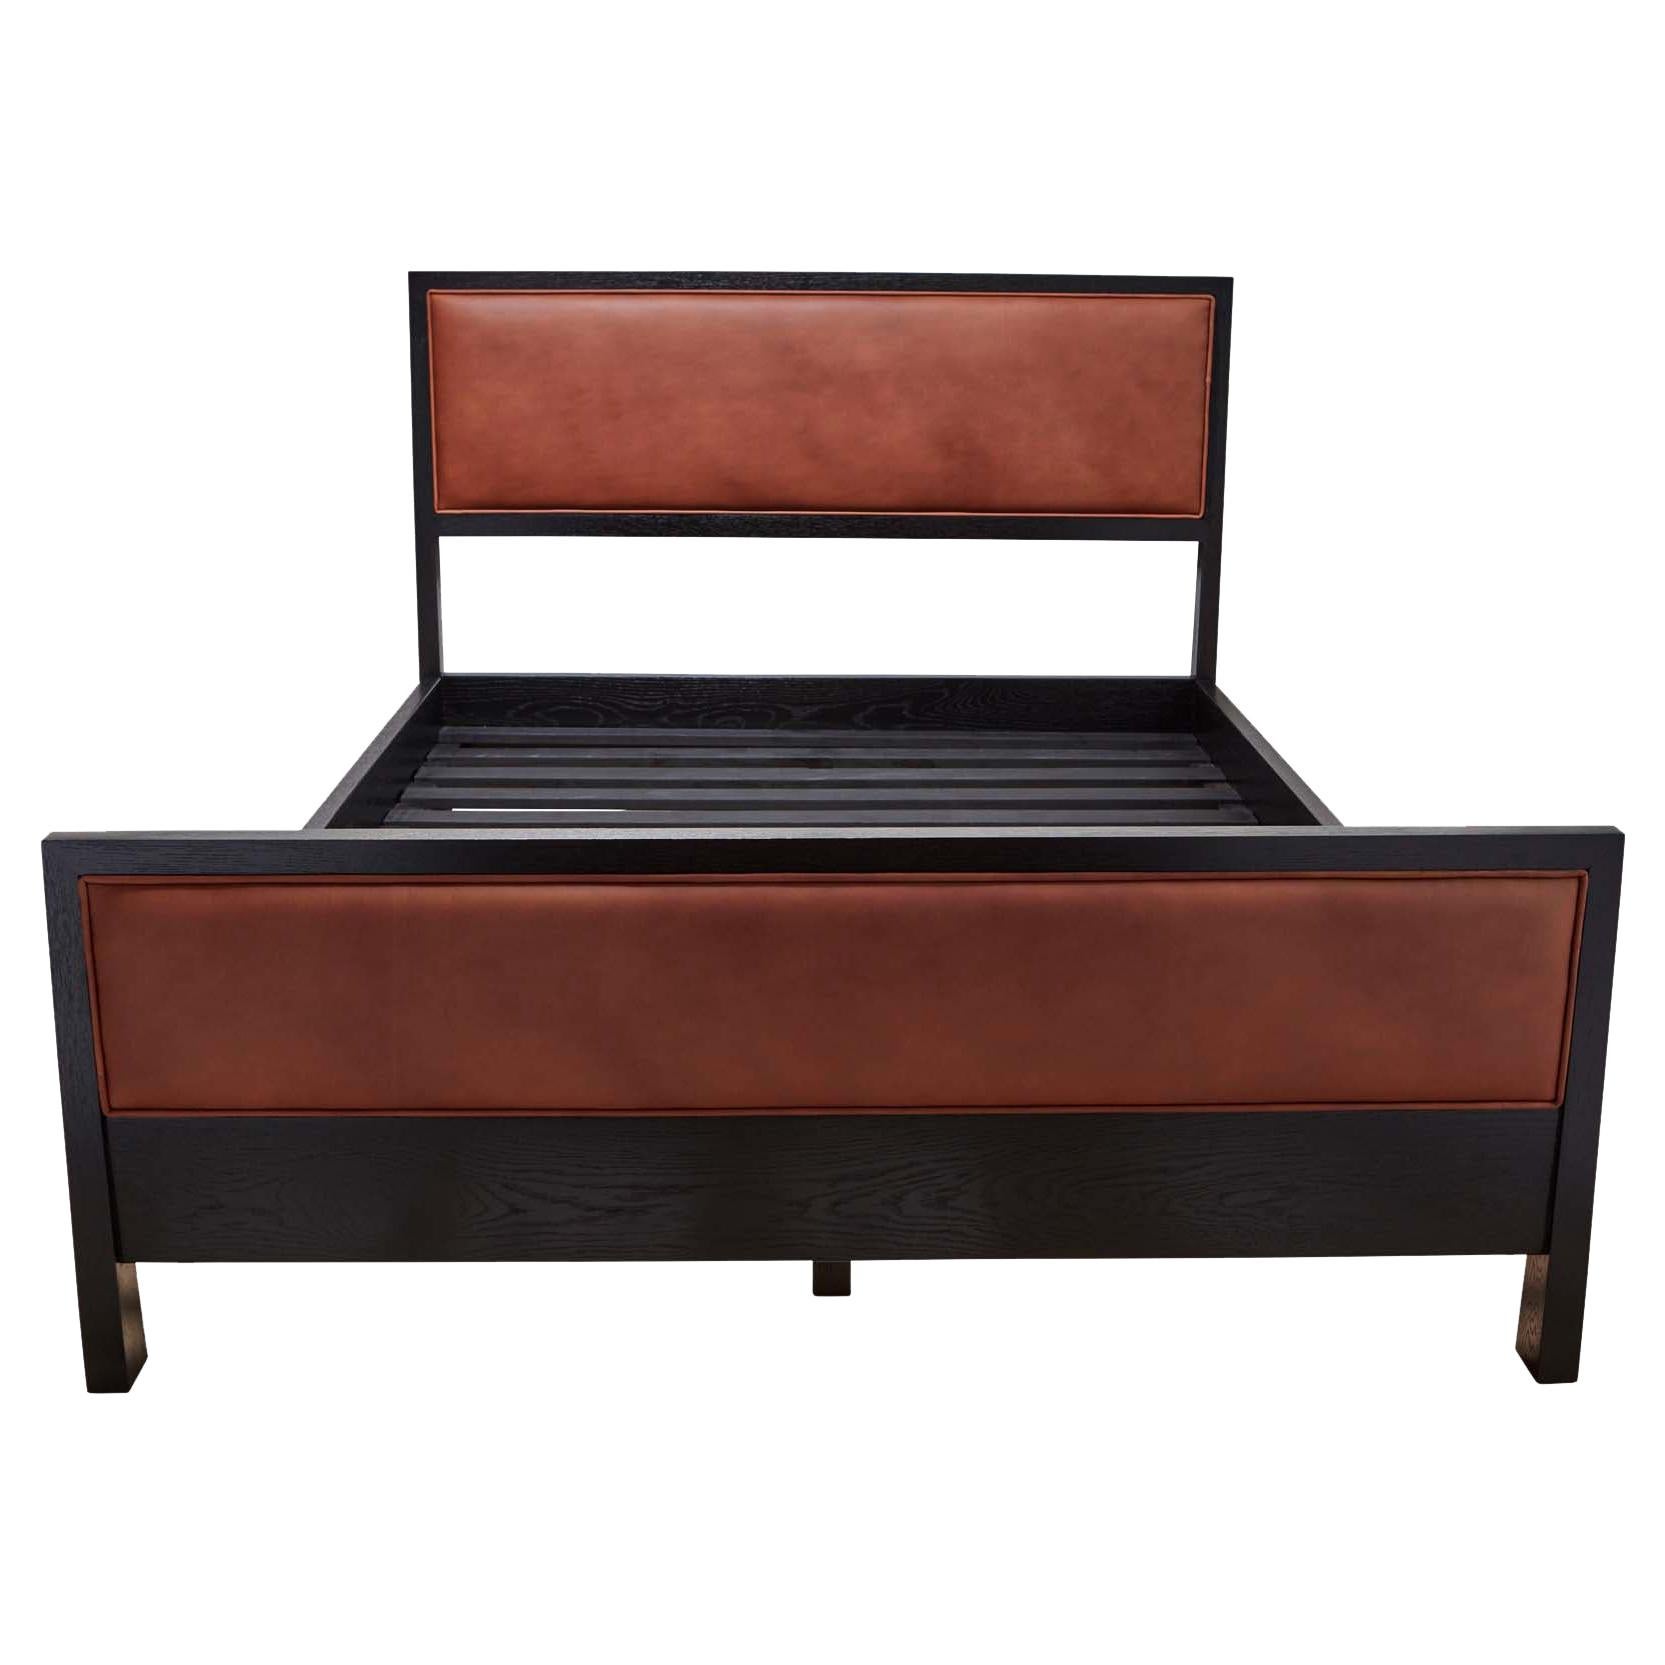 Cognac Leather and Black Oak Auden Bed by Lawson-Fenning, Queen